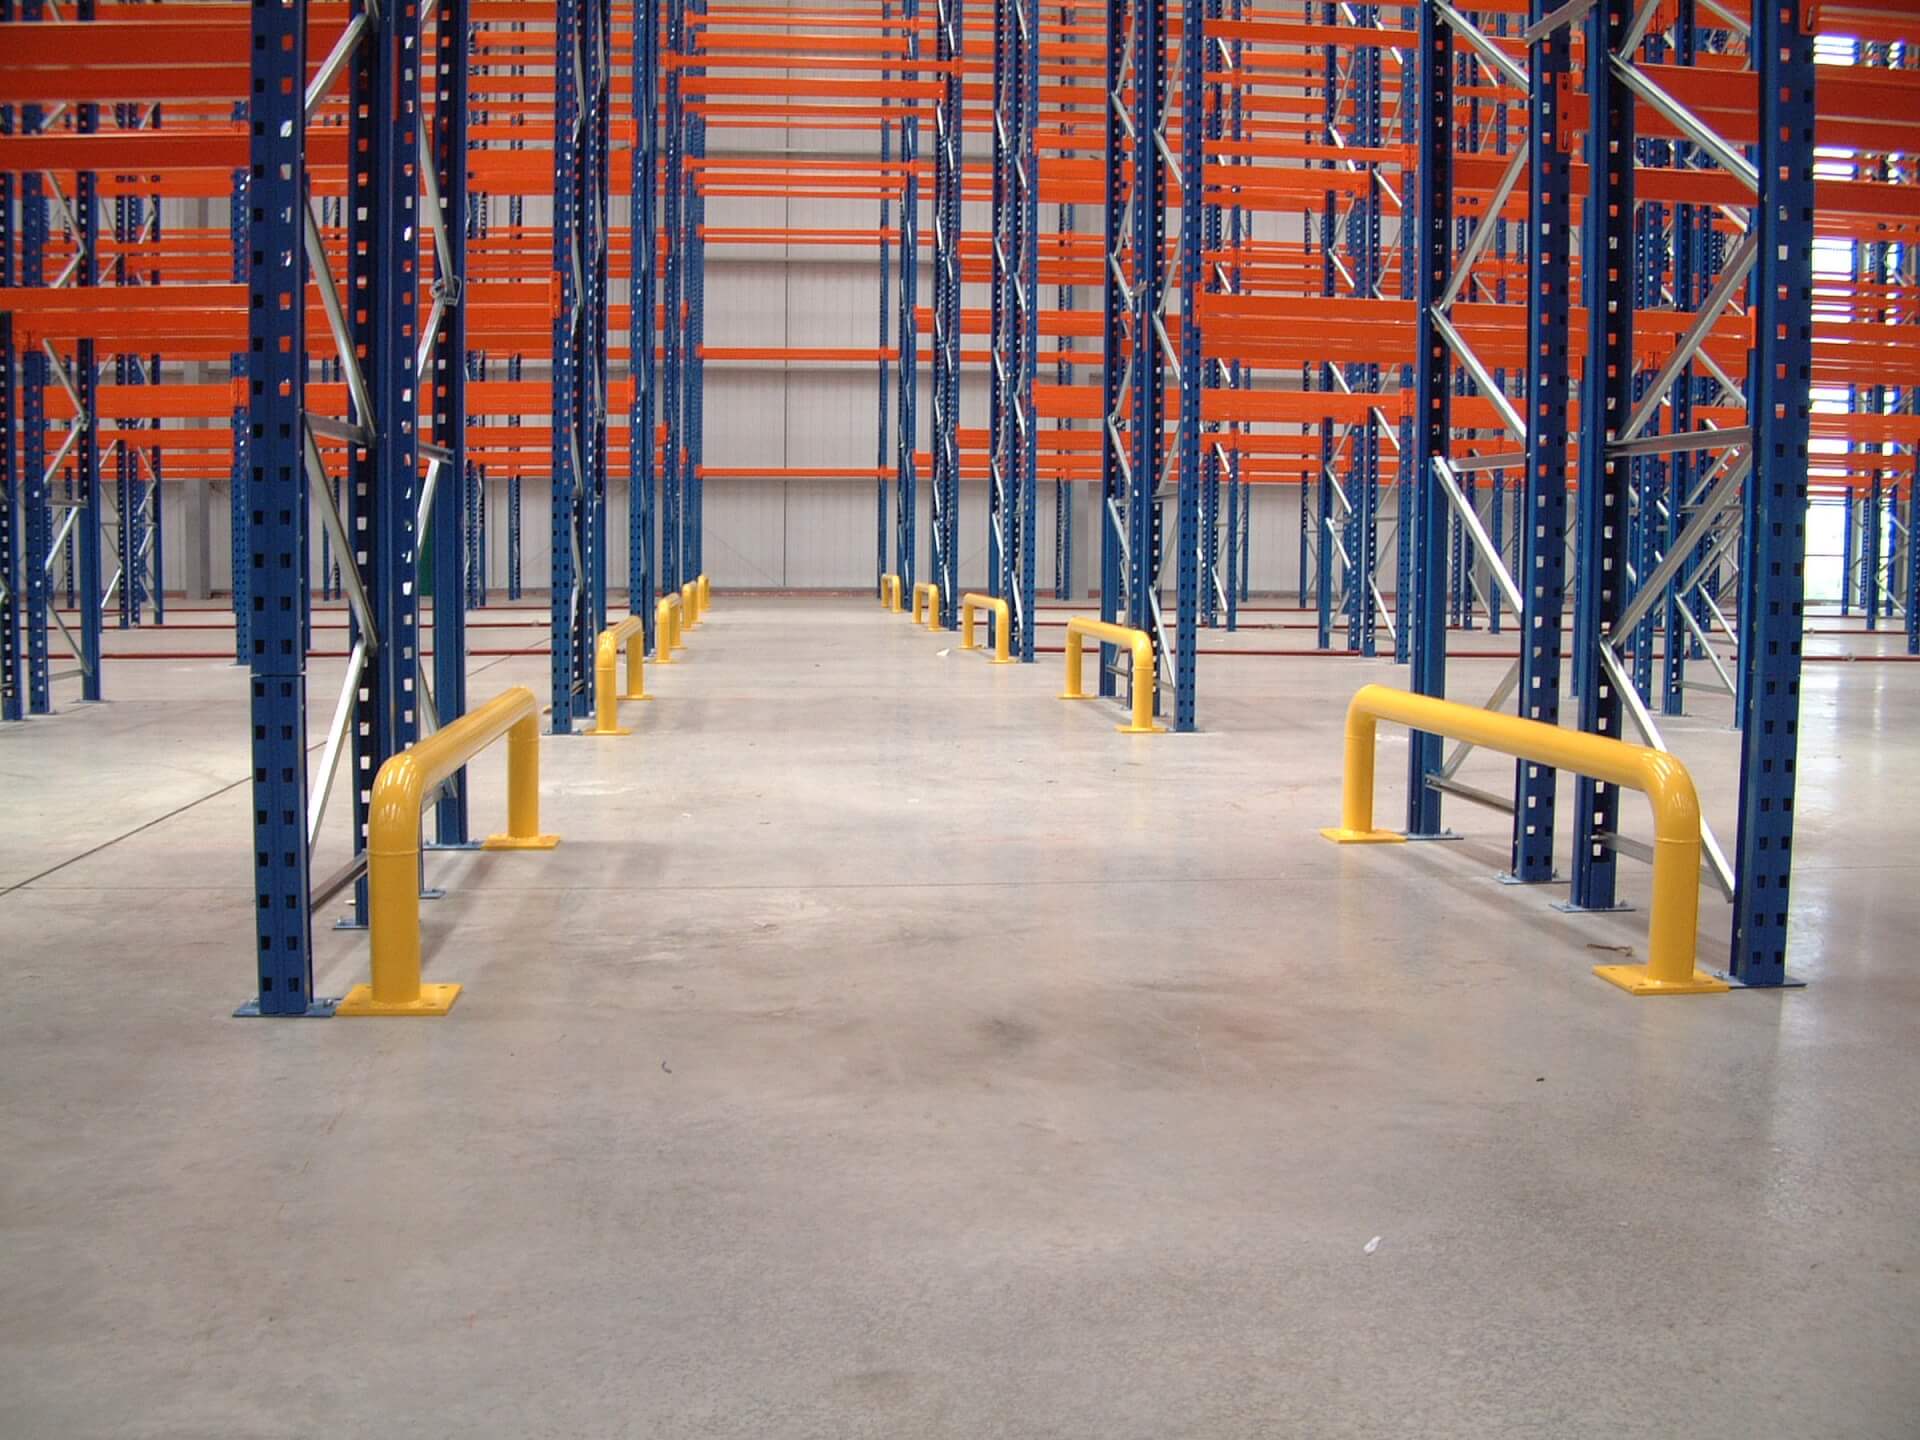 Safety Inspections, Used Pallet Racking in London, We Buy Any Pallet Racking, Pallet Racking, Pallet Racking UK, Pallet Racking North, Pallet Racking North West, Pallet Racking North East, Pallet Racking County Durham